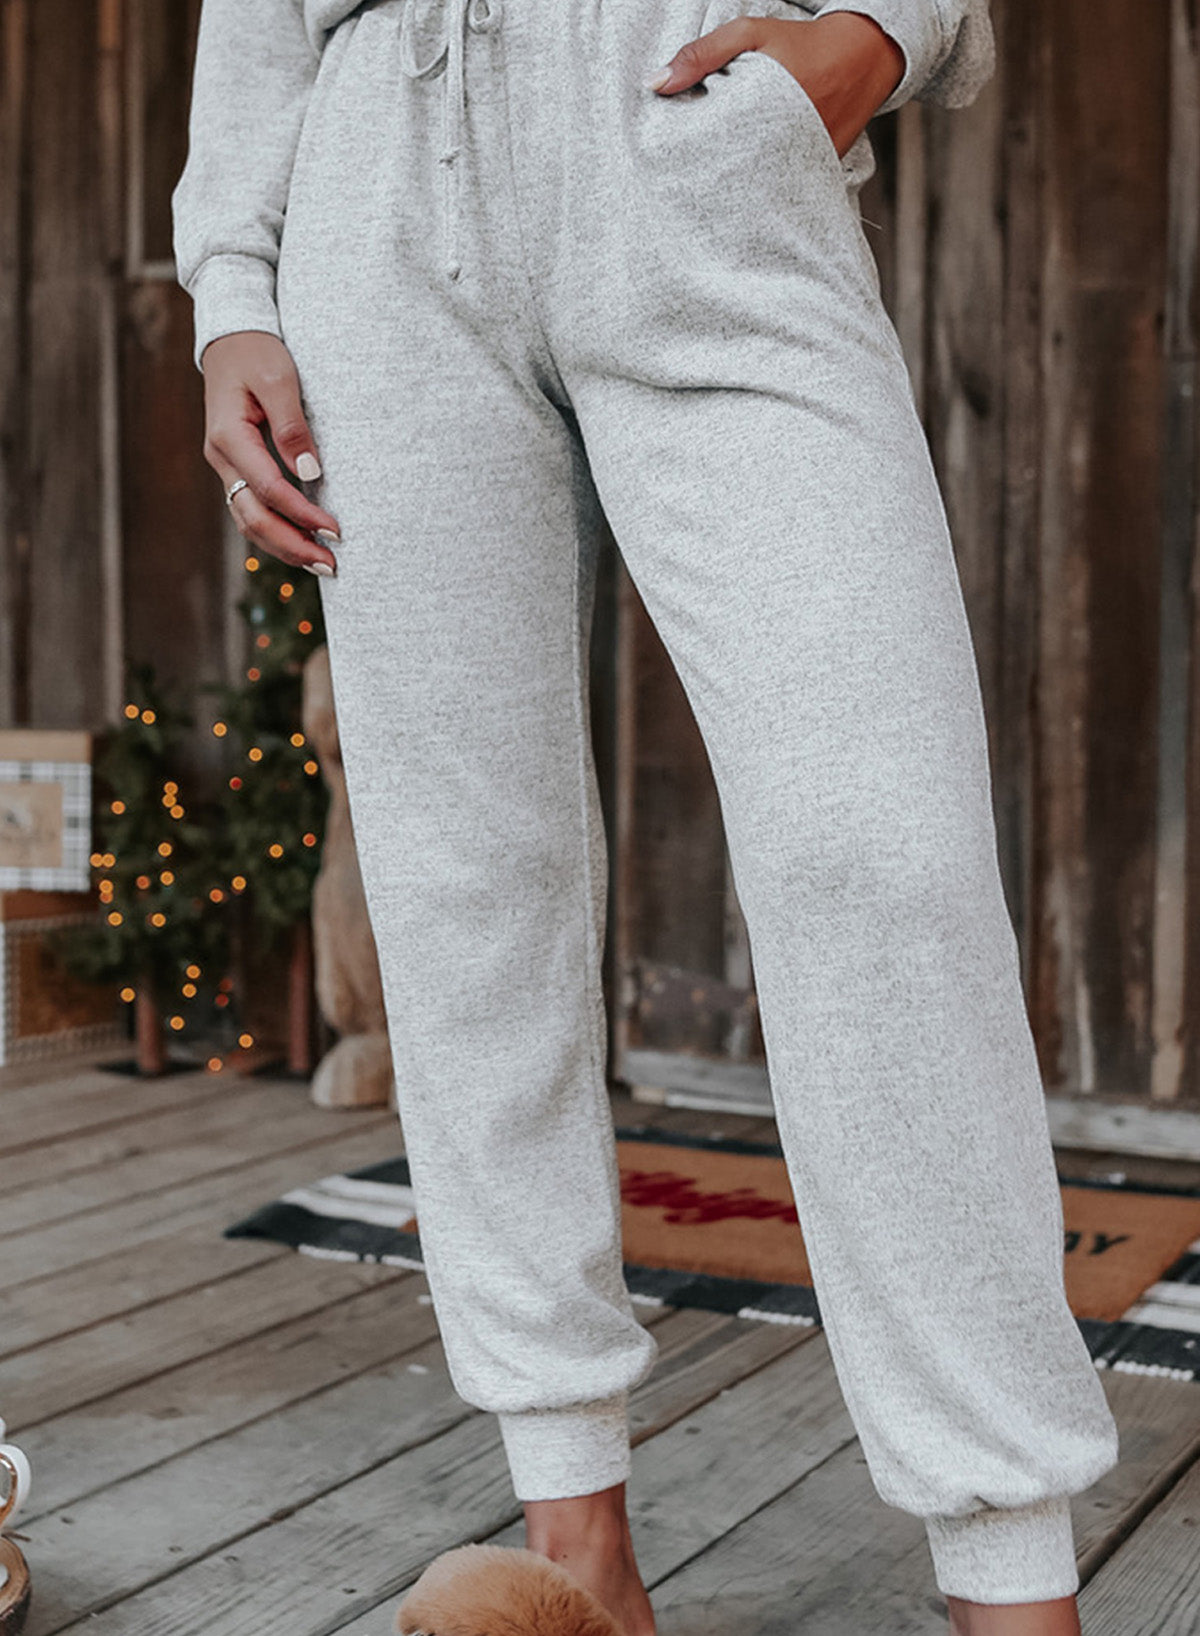 LC15306-11-S, LC15306-11-M, LC15306-11-L, LC15306-11-XL, LC15306-11-2XL, Gray Women's Long Sleeve Sweatsuit Set Pullover and Jogger Pants Lounge Set